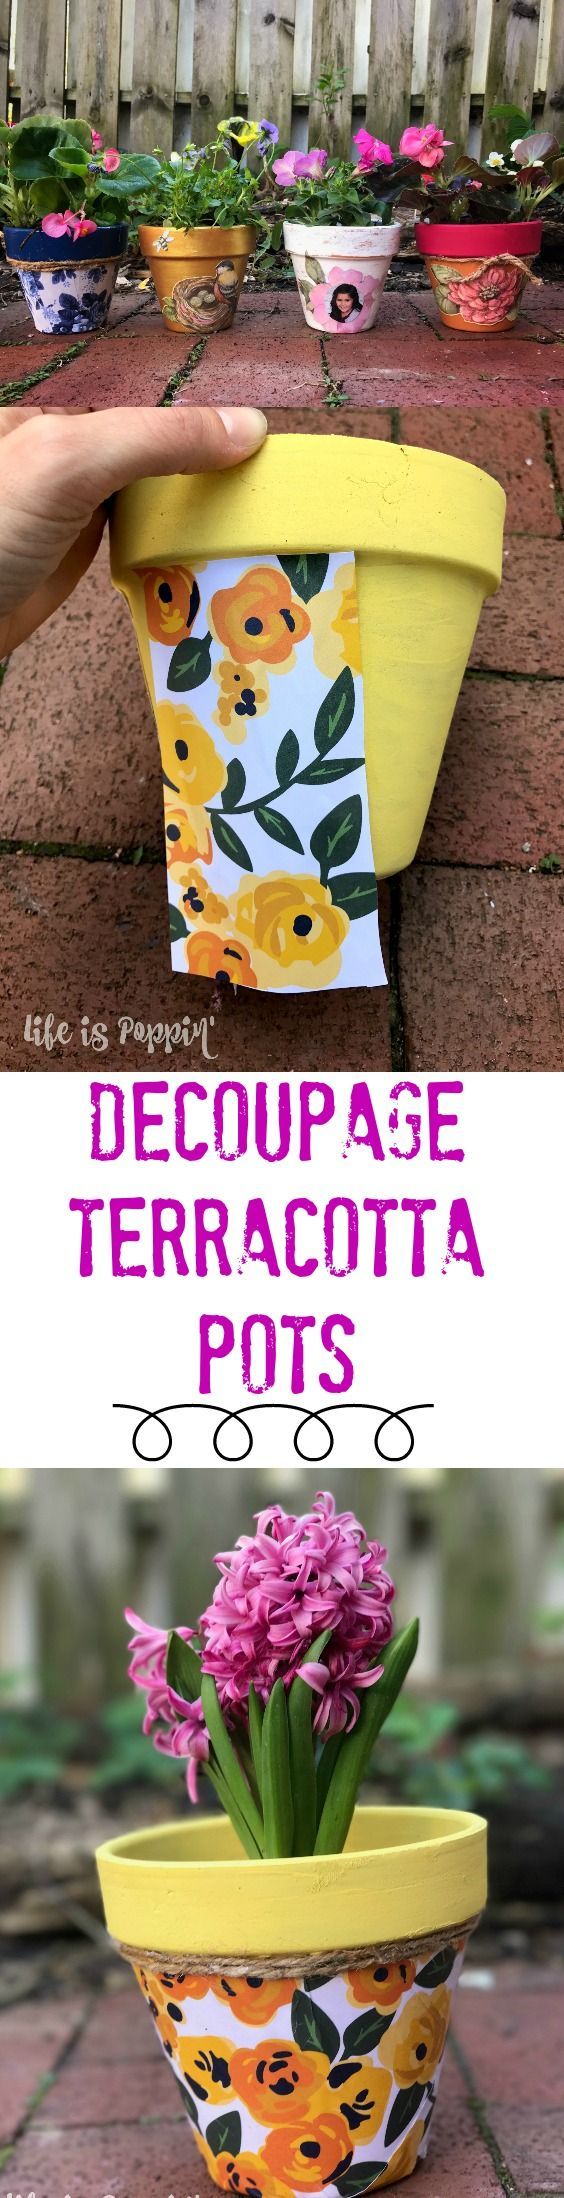 A quick tutorial of how to make these easy and inexpensive decoupage terracotta pots just in time for Mother’s Day! Make Mom